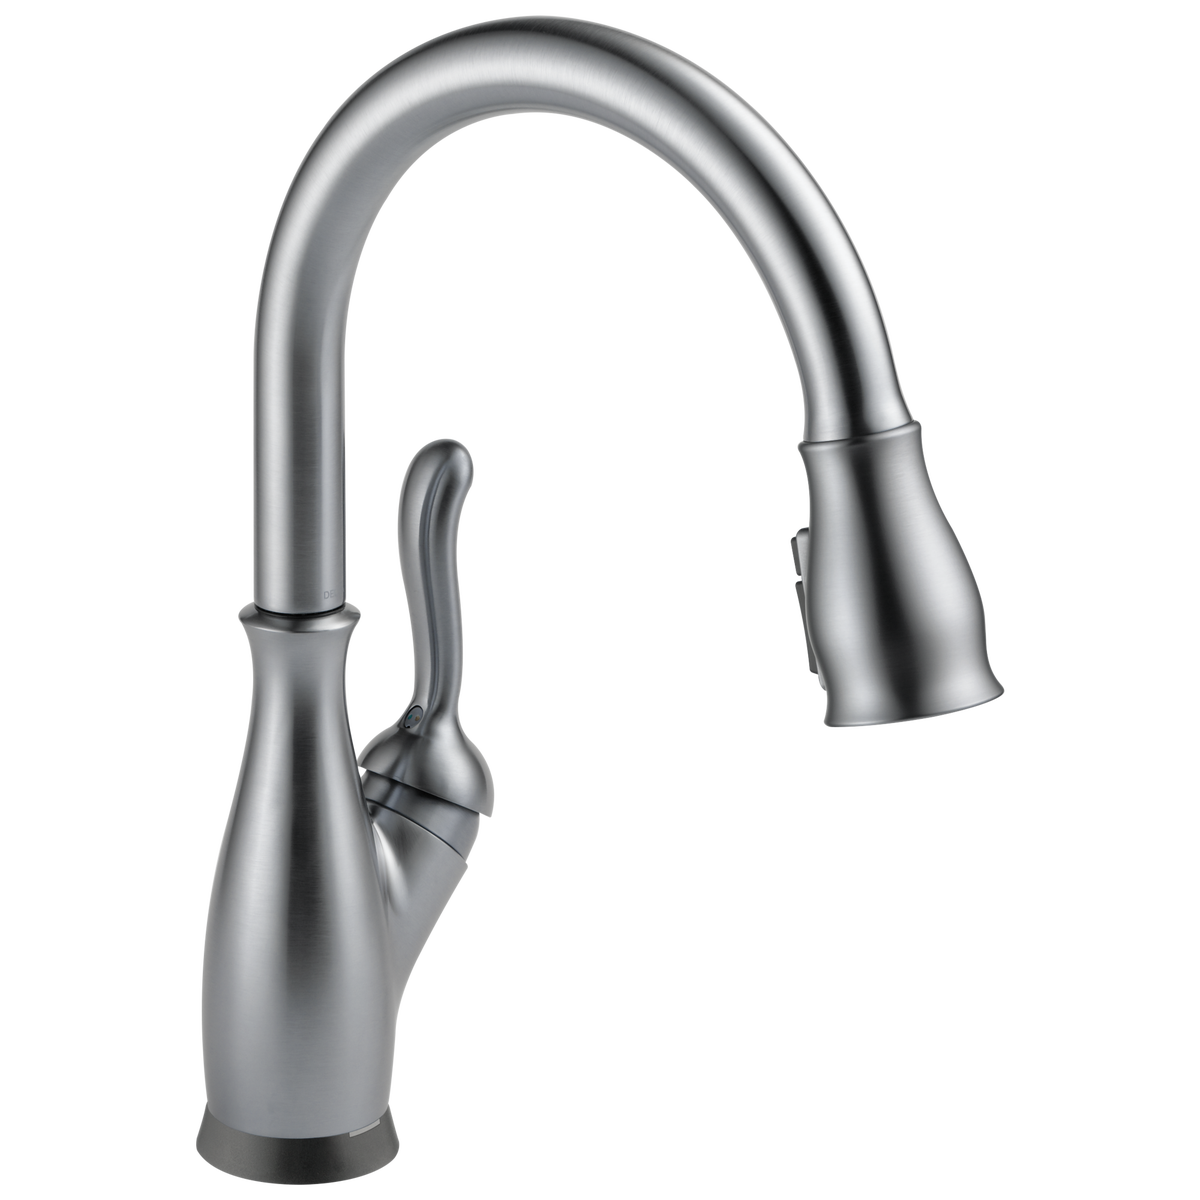  Delta  Leland Voice-Activated Pull-Down Kitchen Faucet in Arctic Stainless